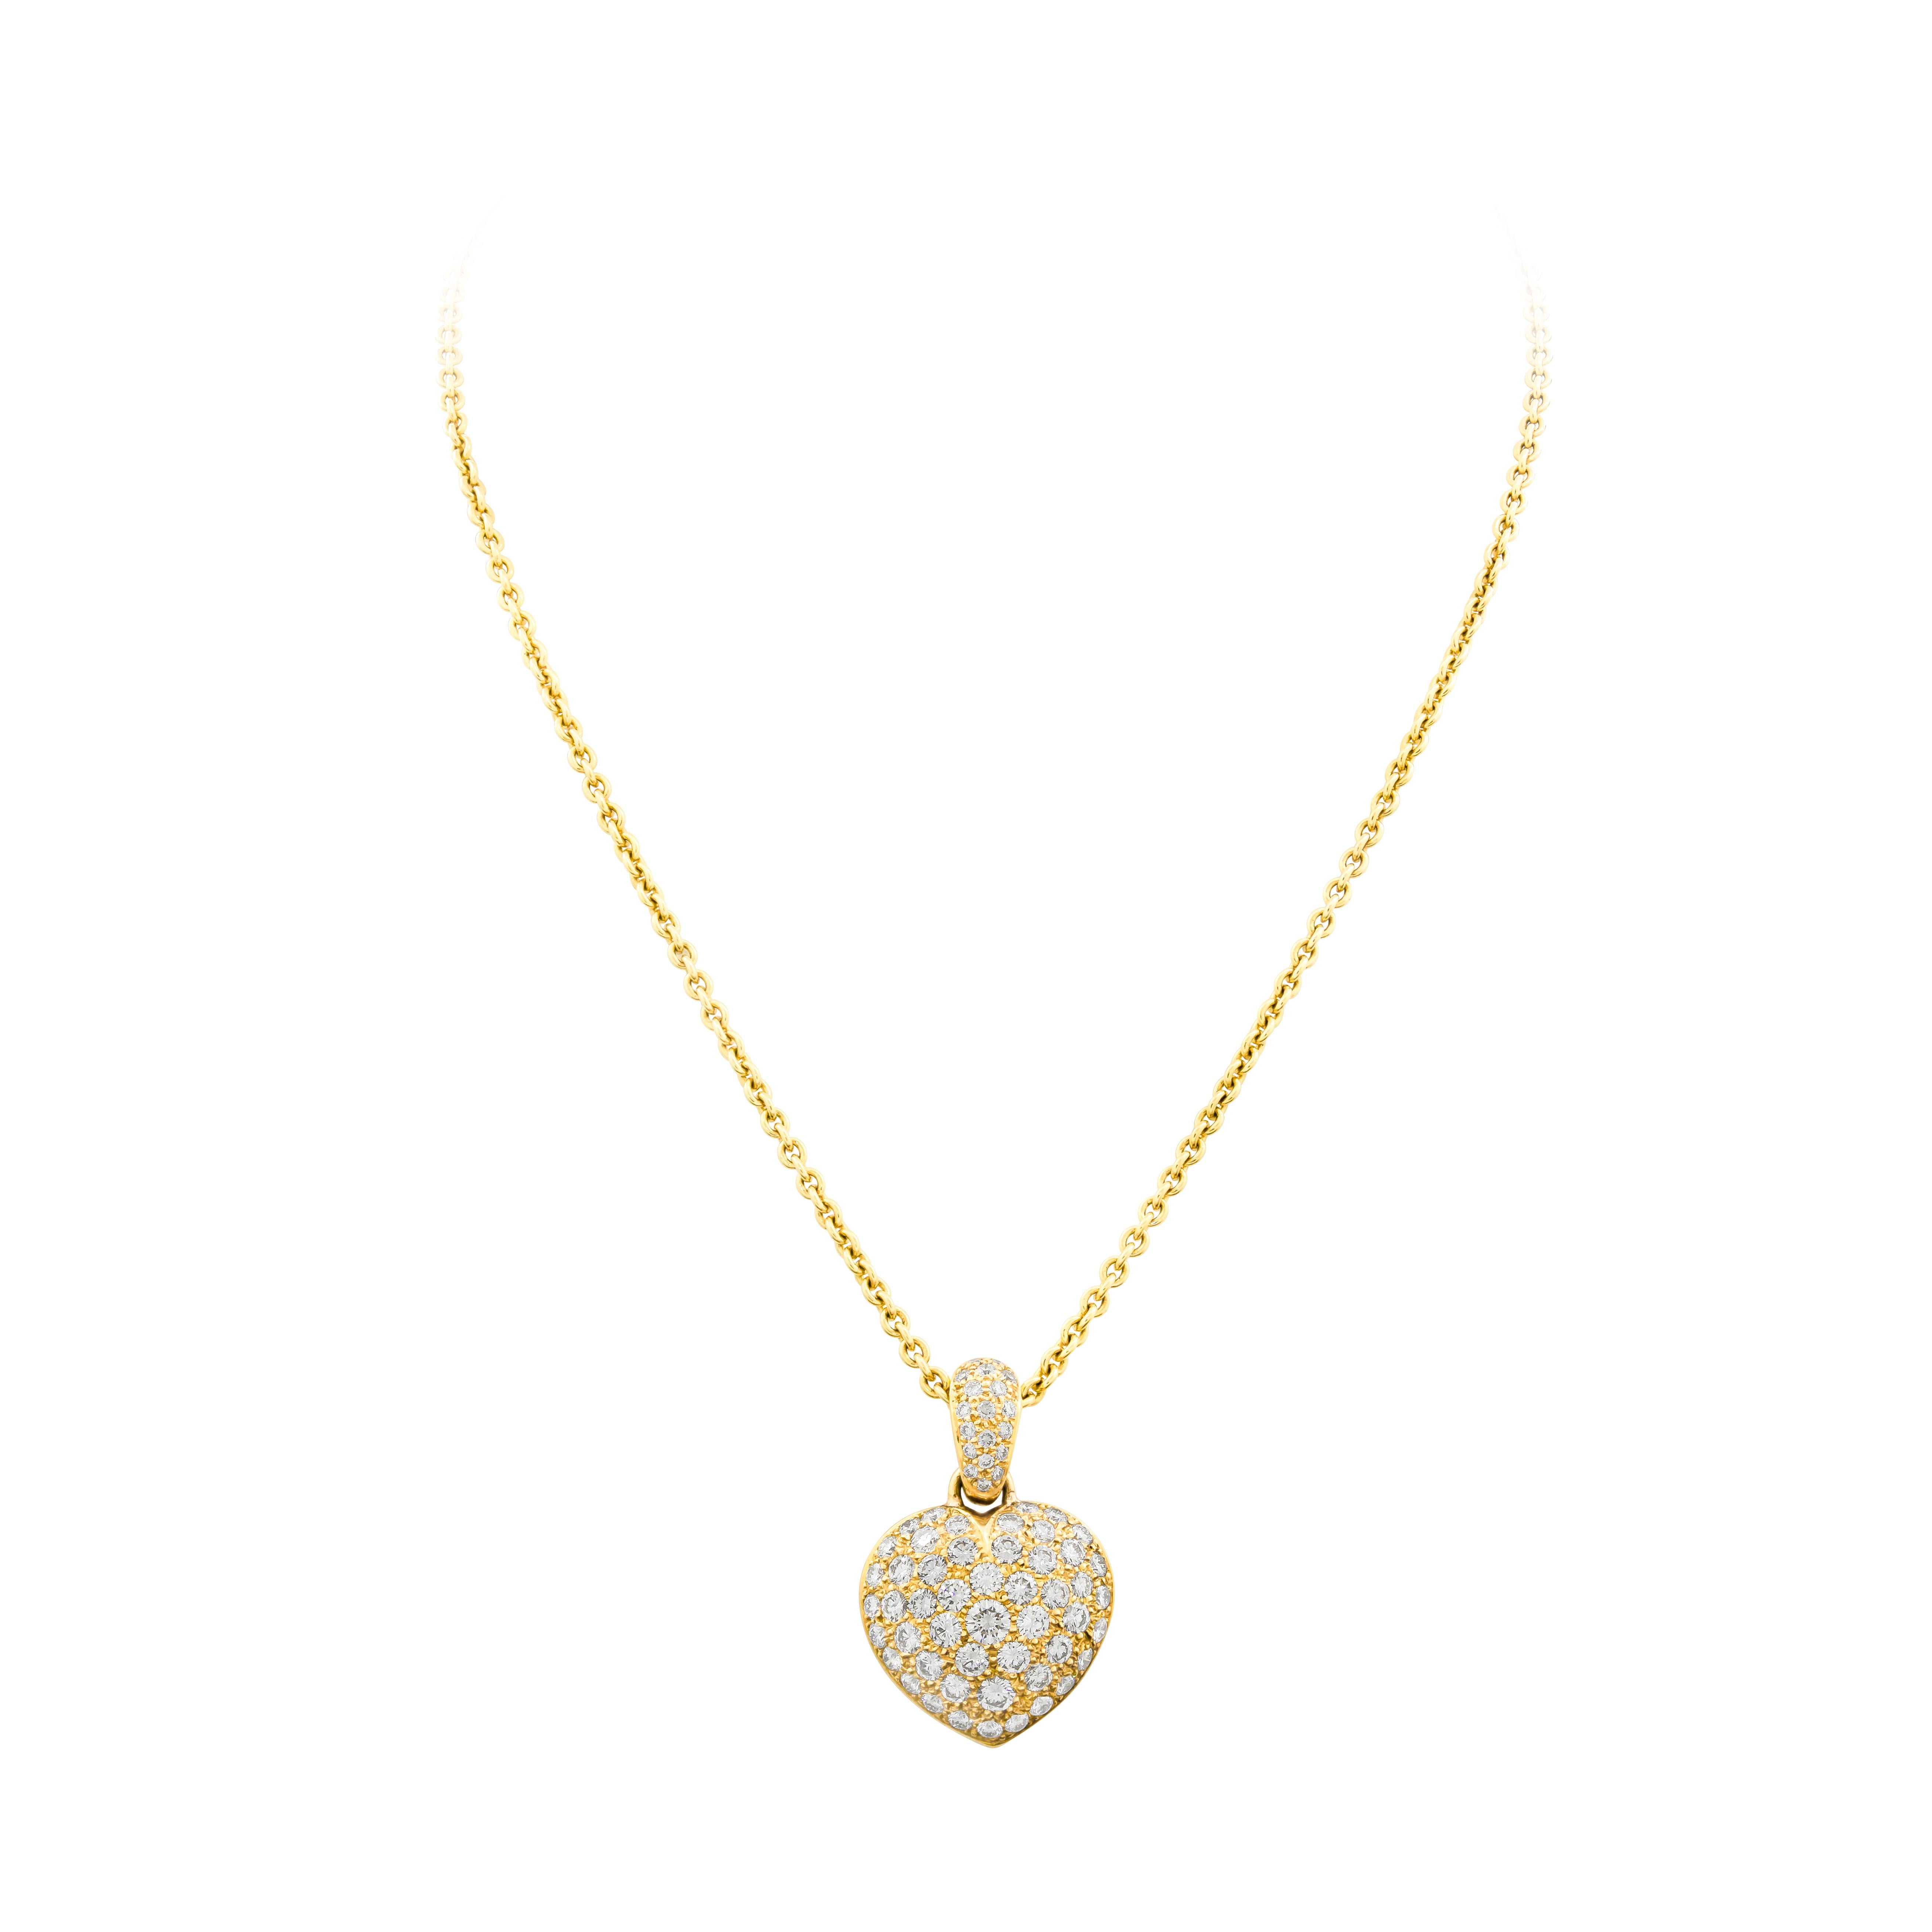 Showcases a rounded heart shaped pendant micro-pavé set with sparkling round diamonds. The diamonds graduate in size as it reaches the center of the heart. Diamonds weigh 4.43 carats total. The pendant is suspended on a diamond encrusted bale made